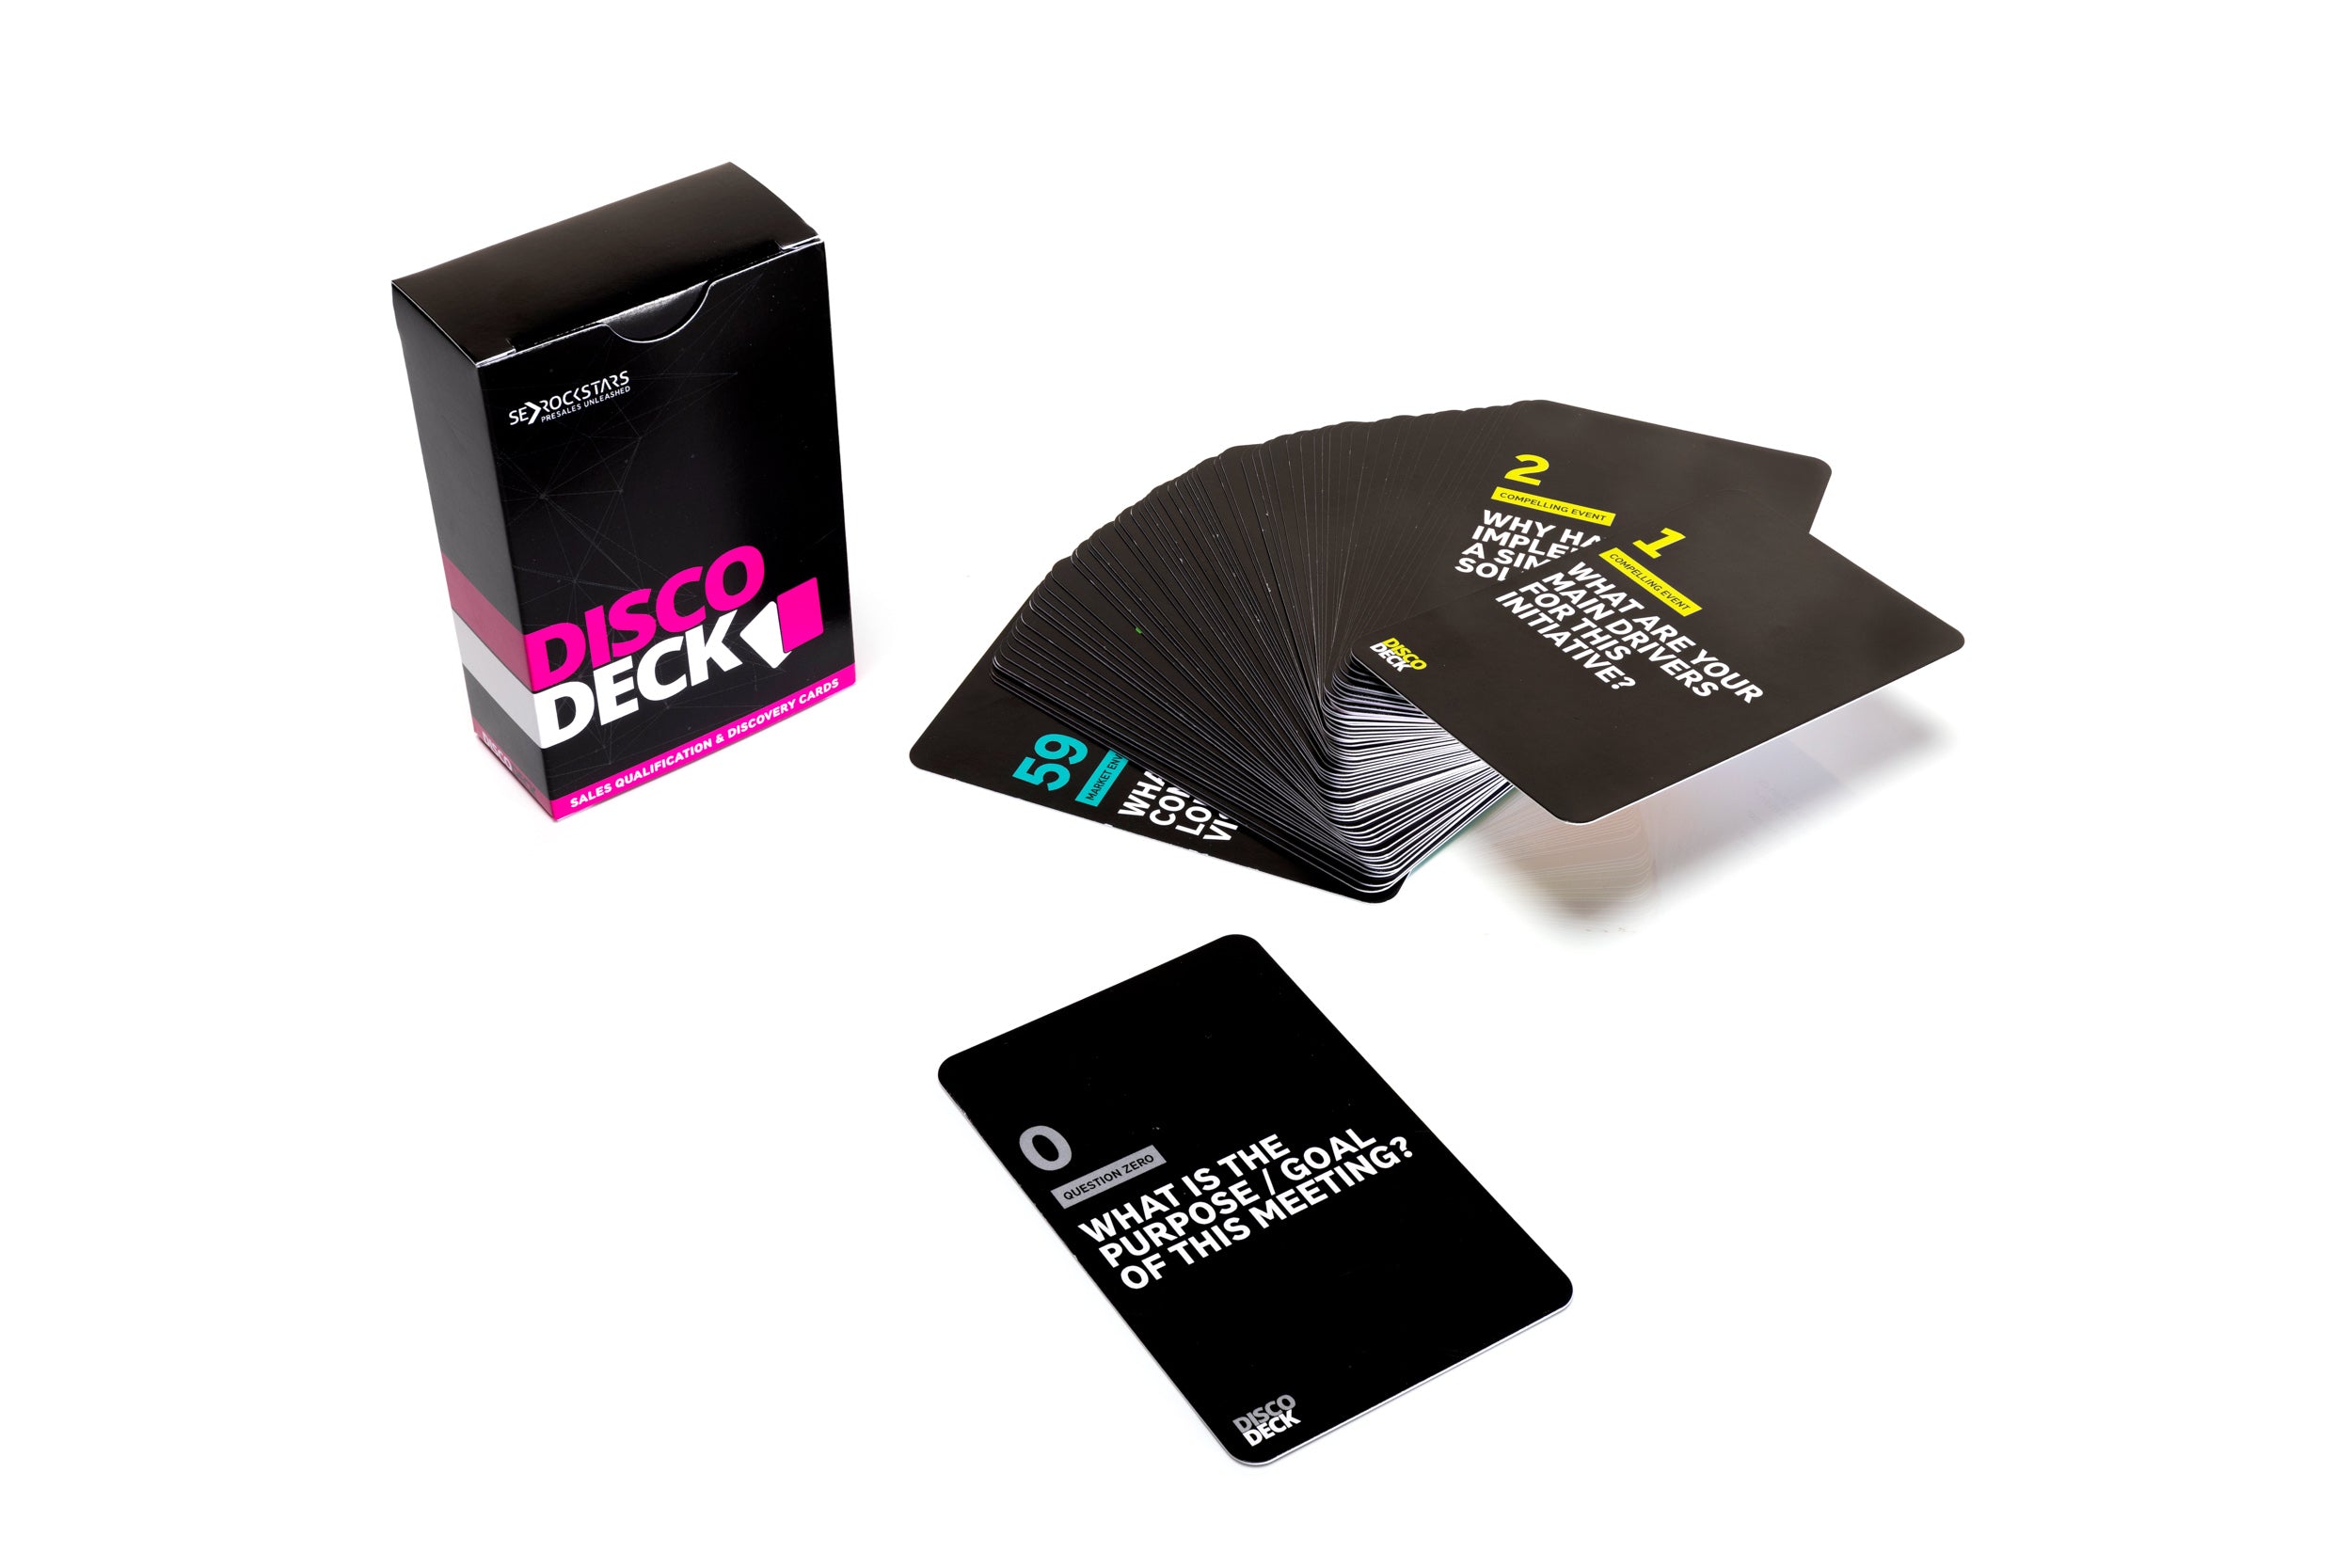 The Disco Deck - Sales Qualification & Discovery Cards